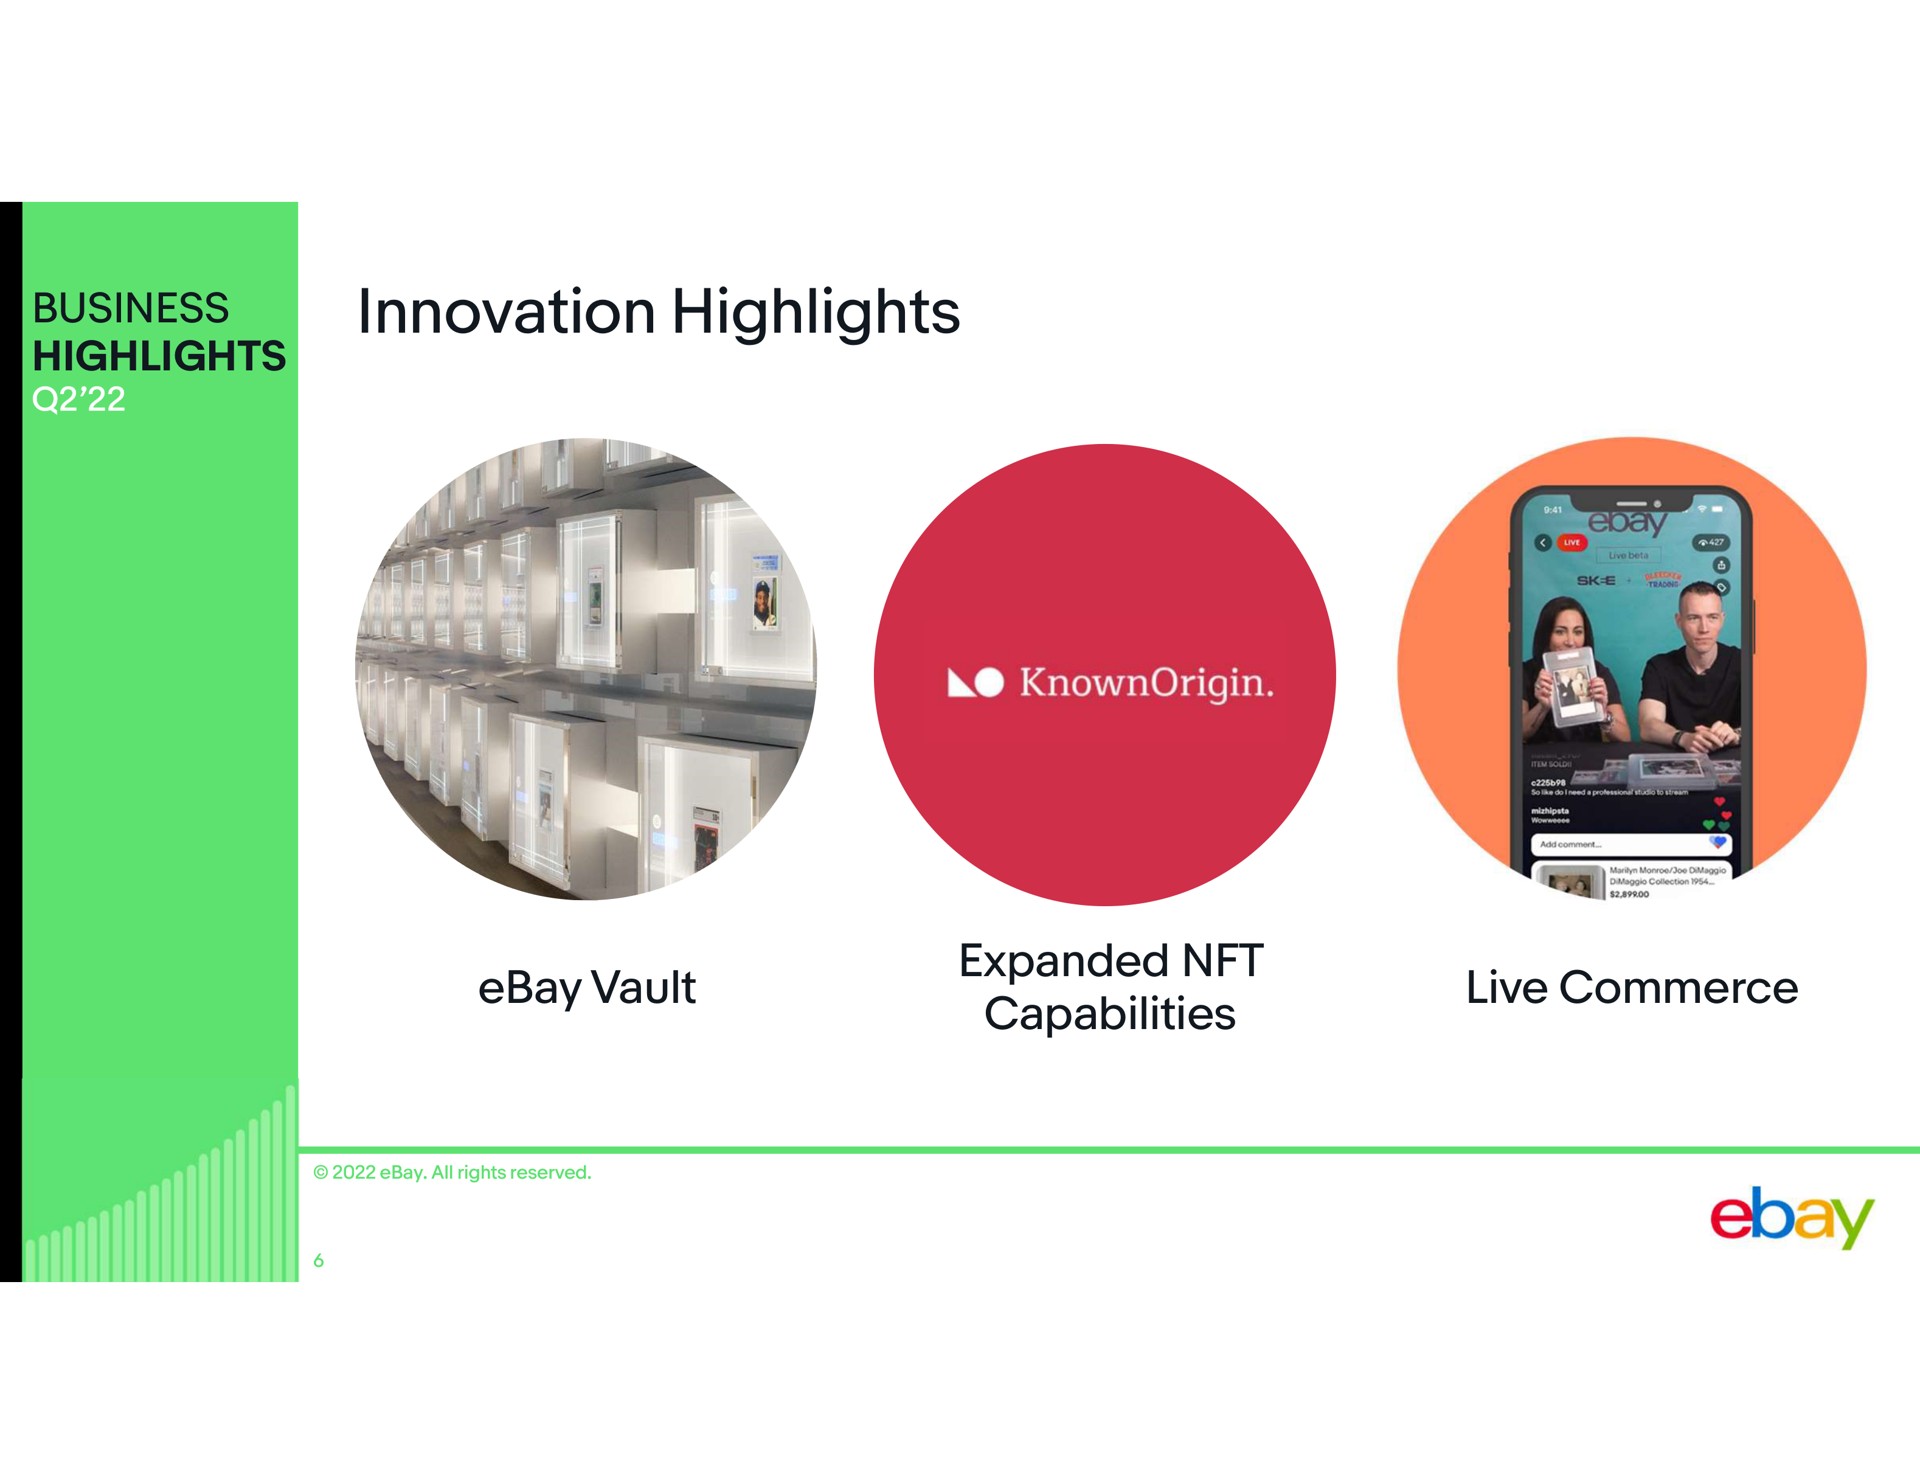 business highlights innovation highlights vault expanded capabilities live commerce | eBay